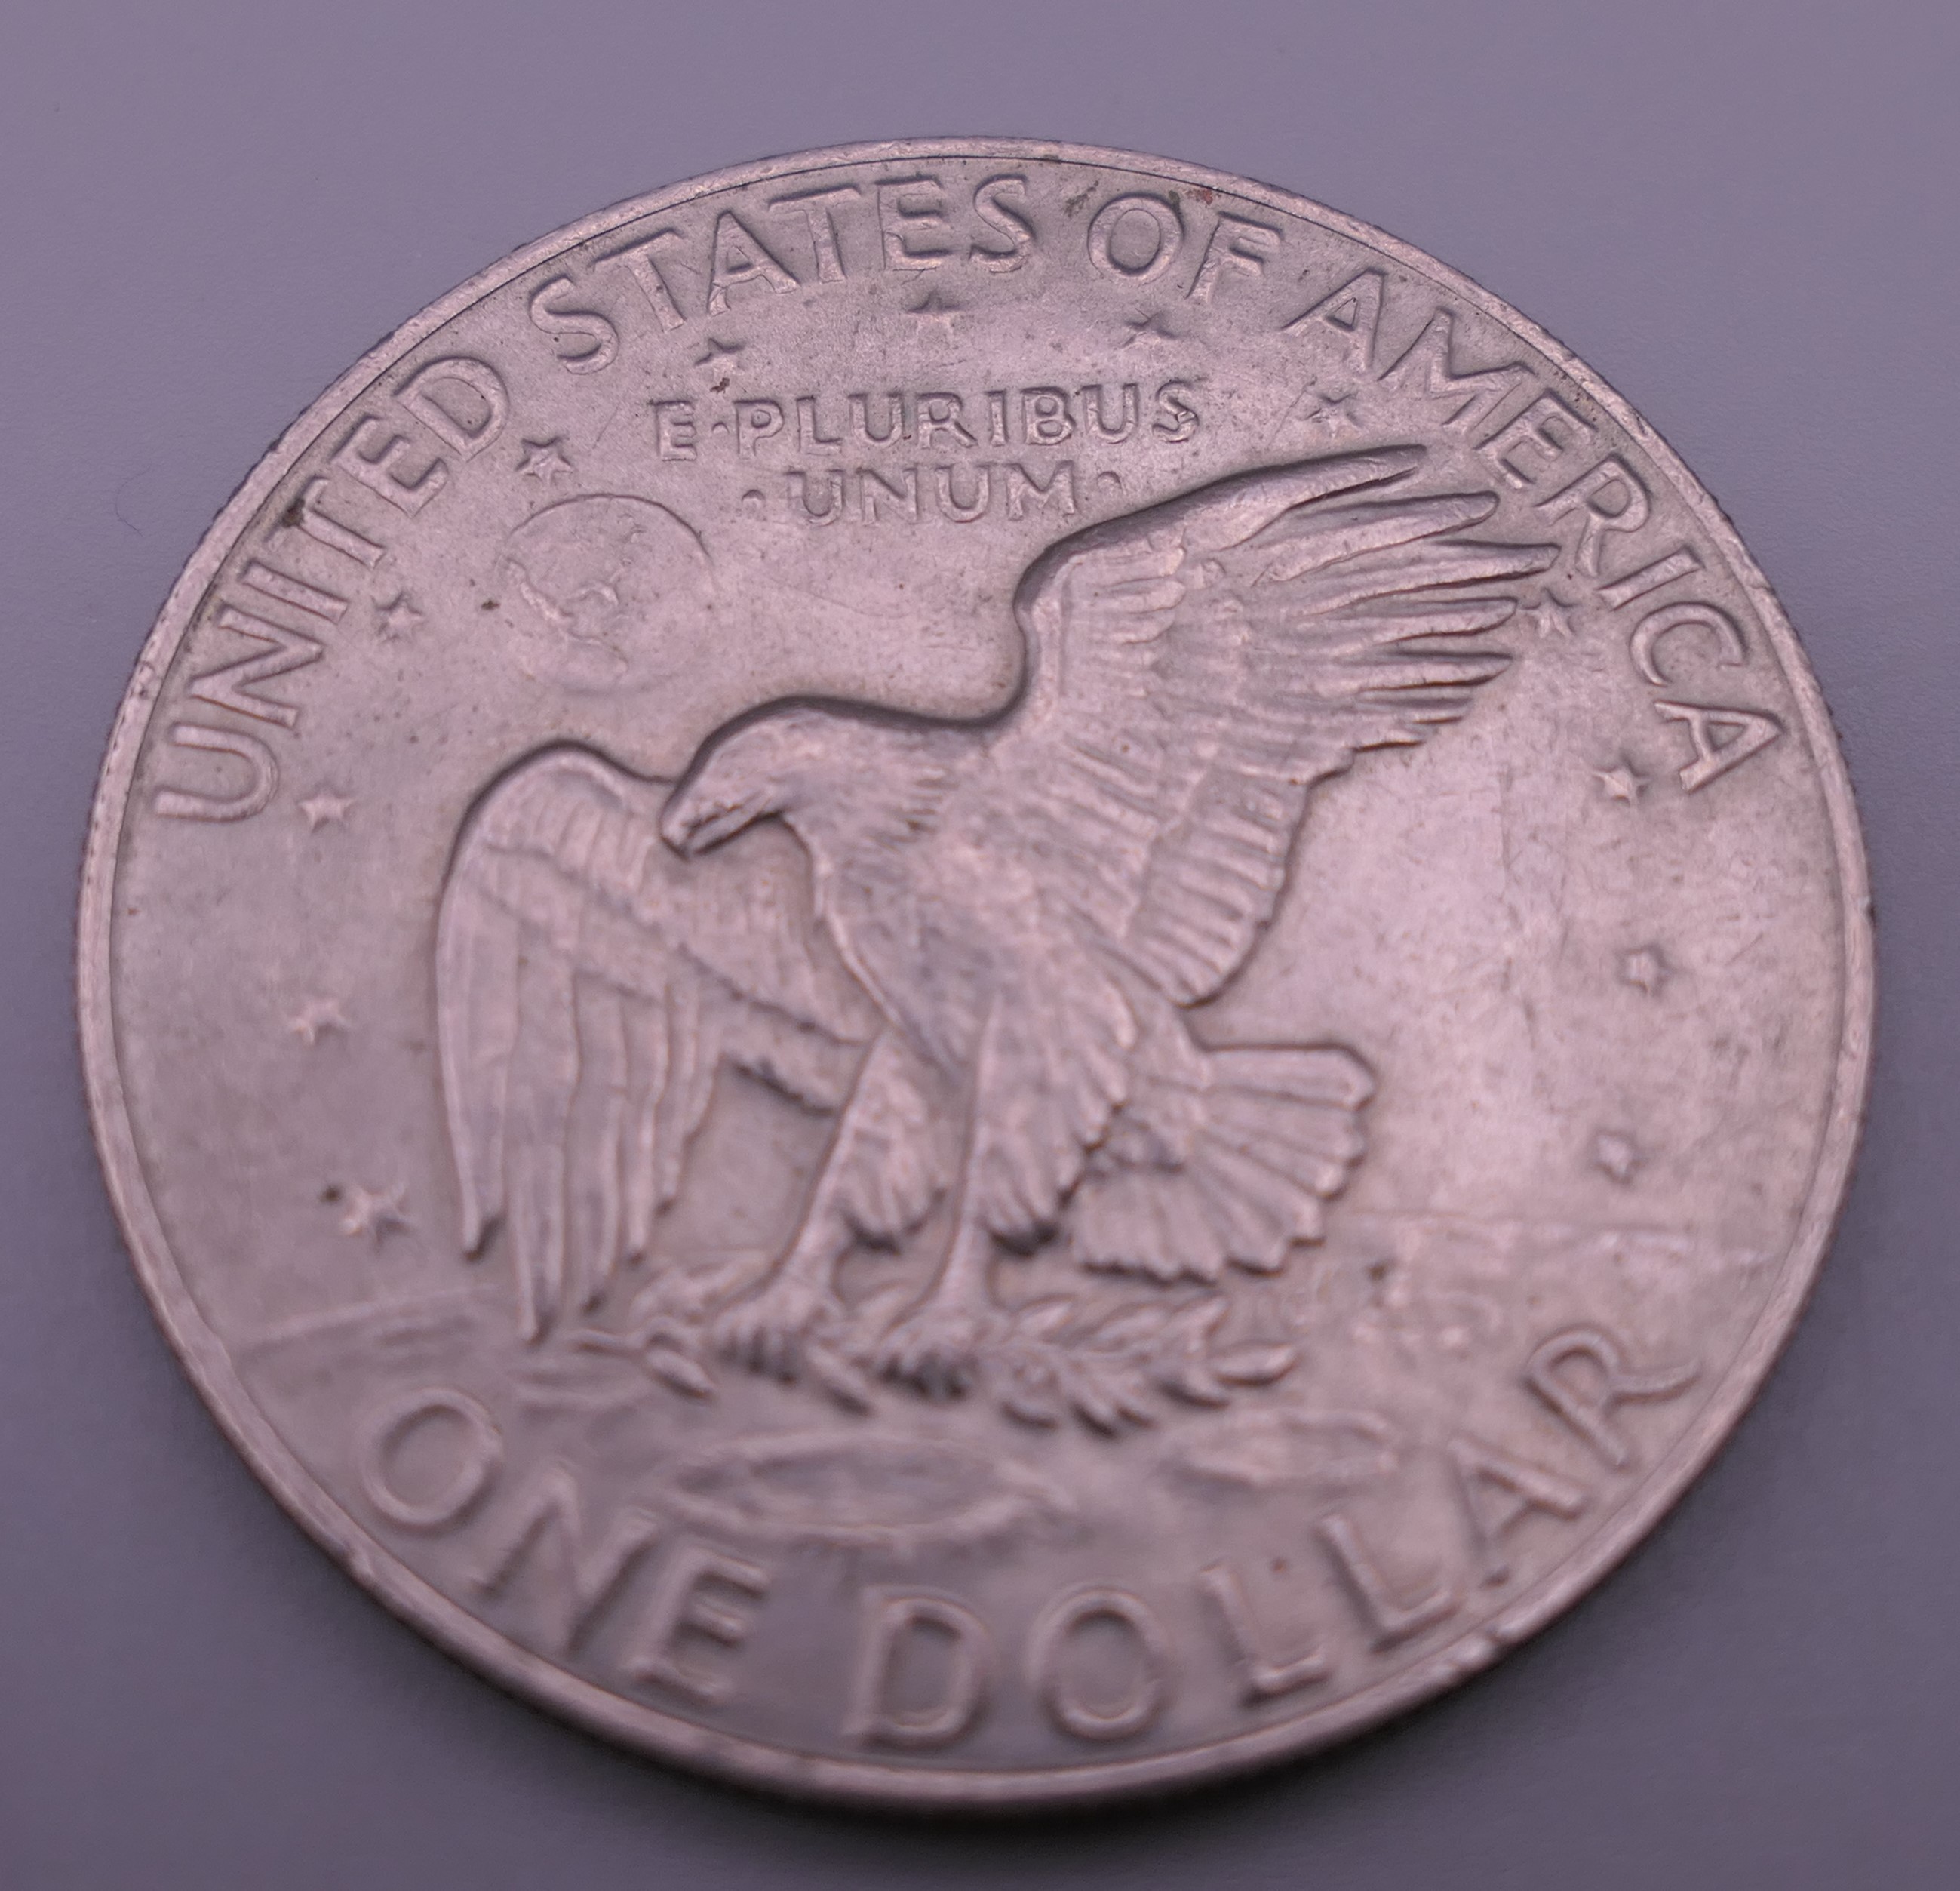 Two 1880 silver dollars each set as a keyring and a 1974 one dollar coin. - Image 5 of 5